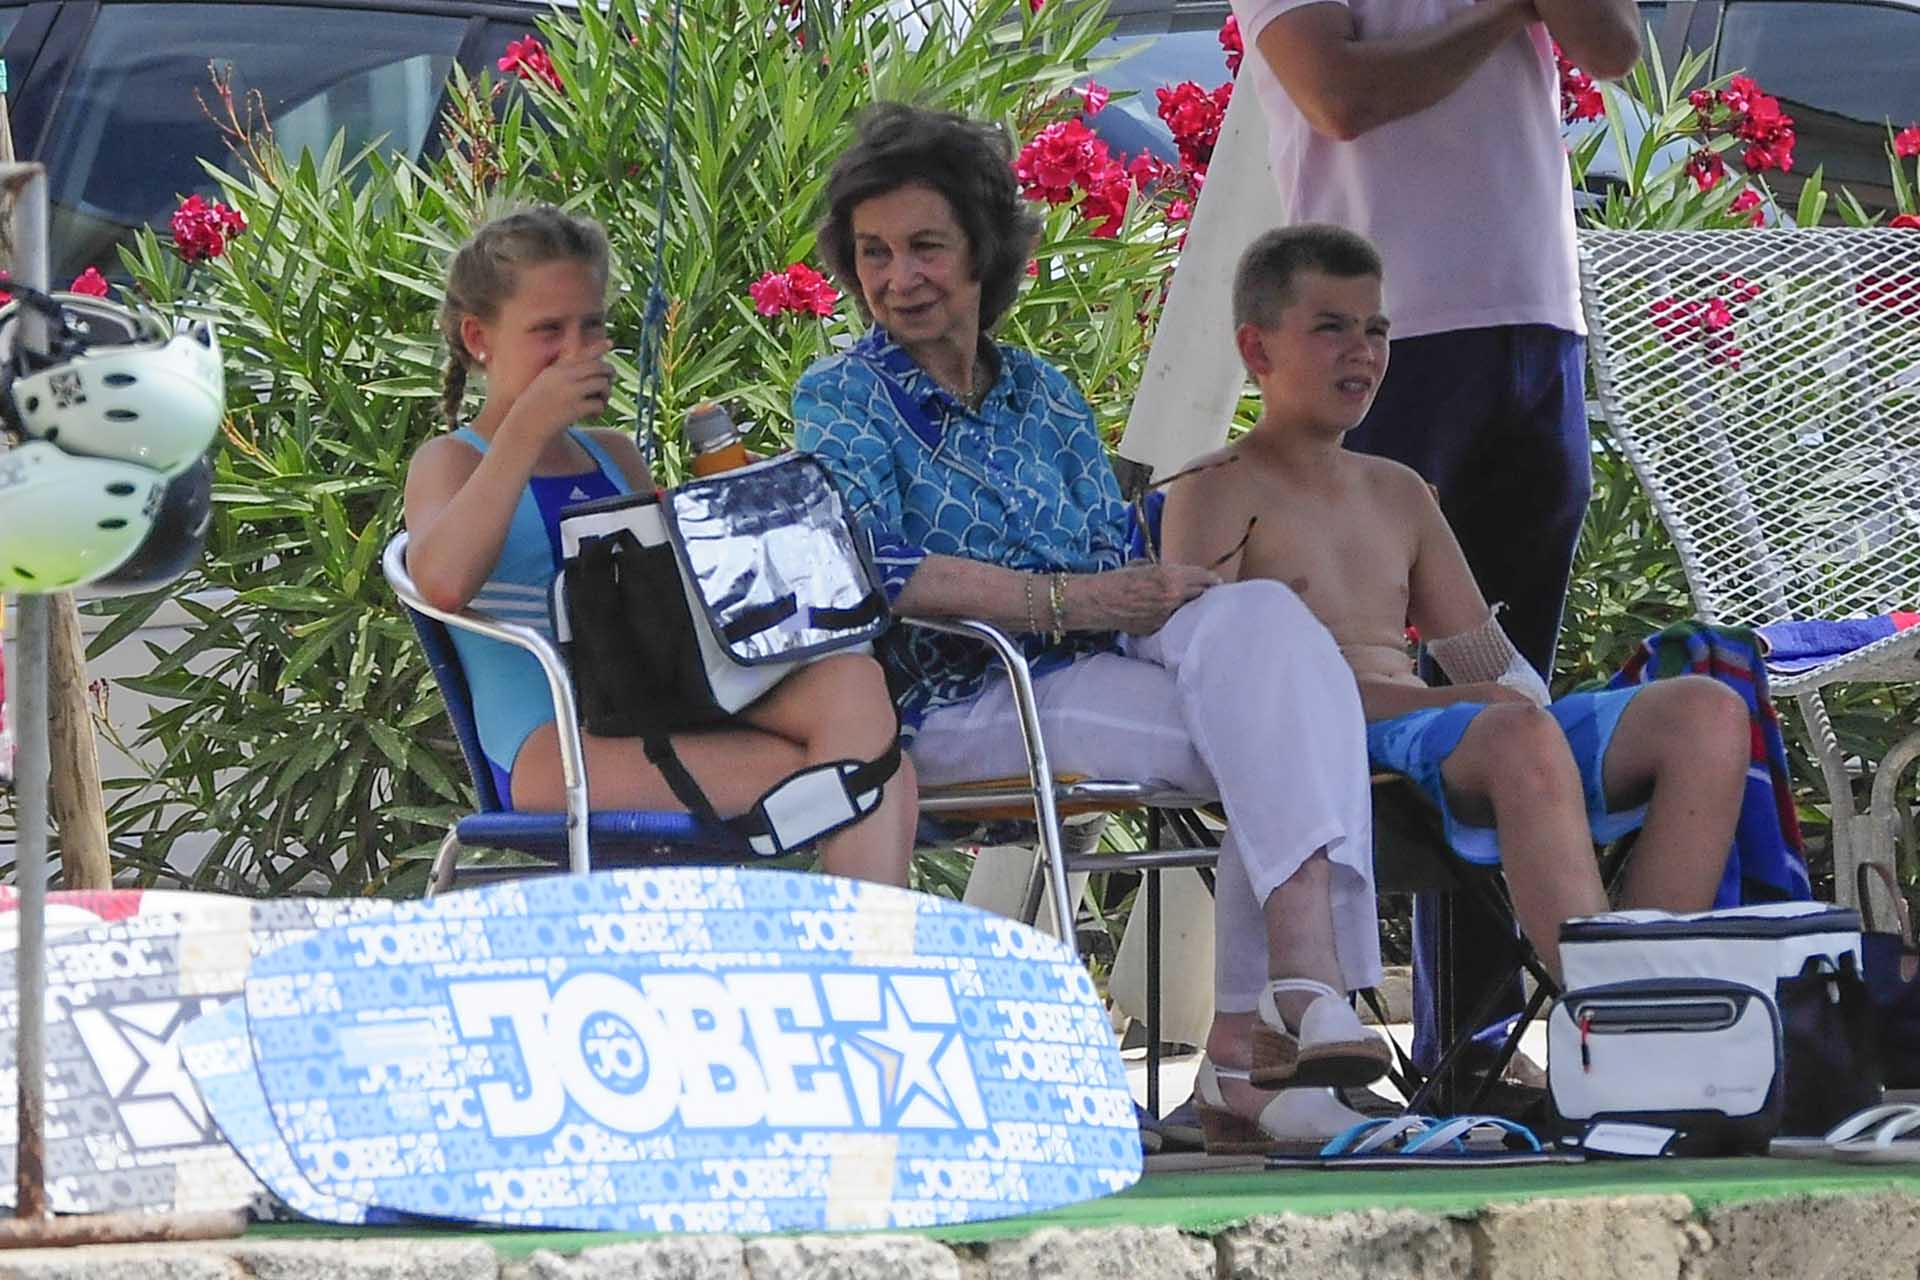 Queen Sofia of Spain and her grandchildren Miguel Urdangarin and Irene Urdangarin on holidays in Palma de Mallorca, on Monday, July 24th 2017.